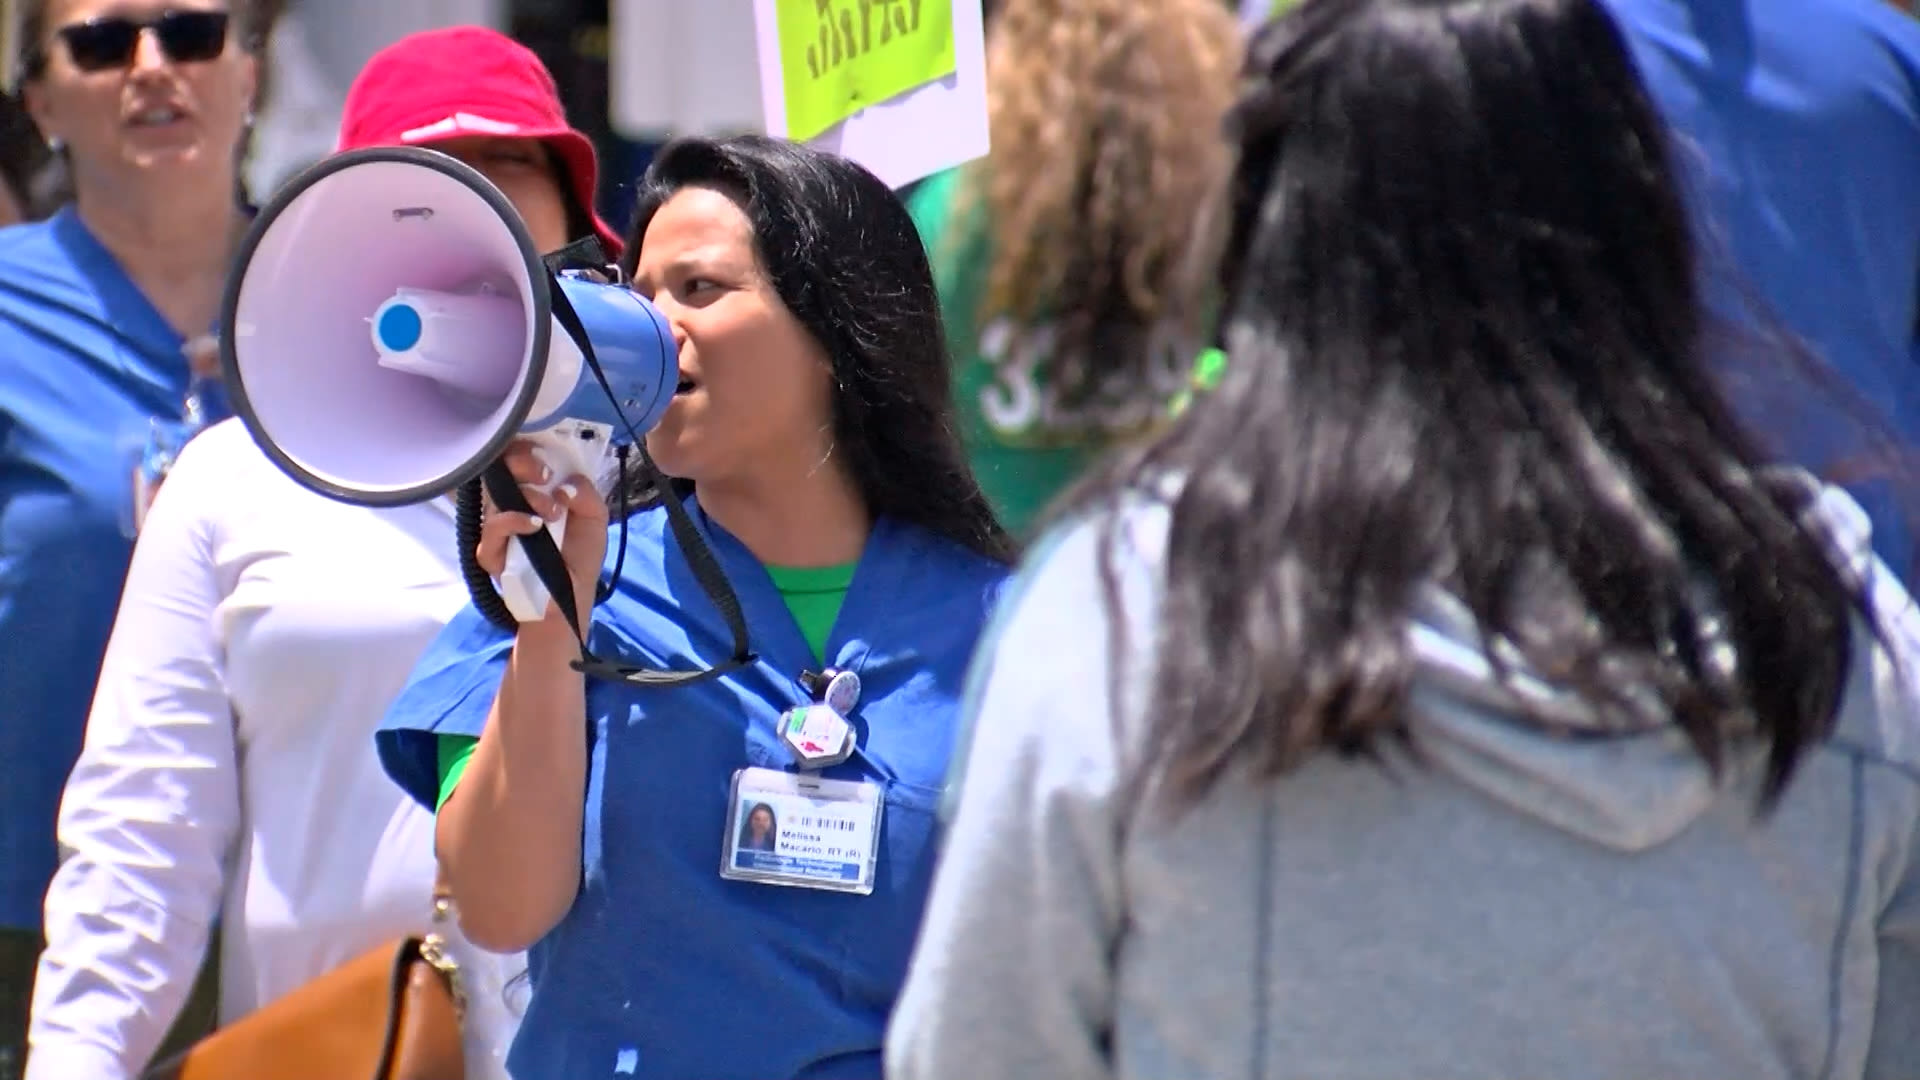 UC San Diego health workers call for higher wages and housing assistance